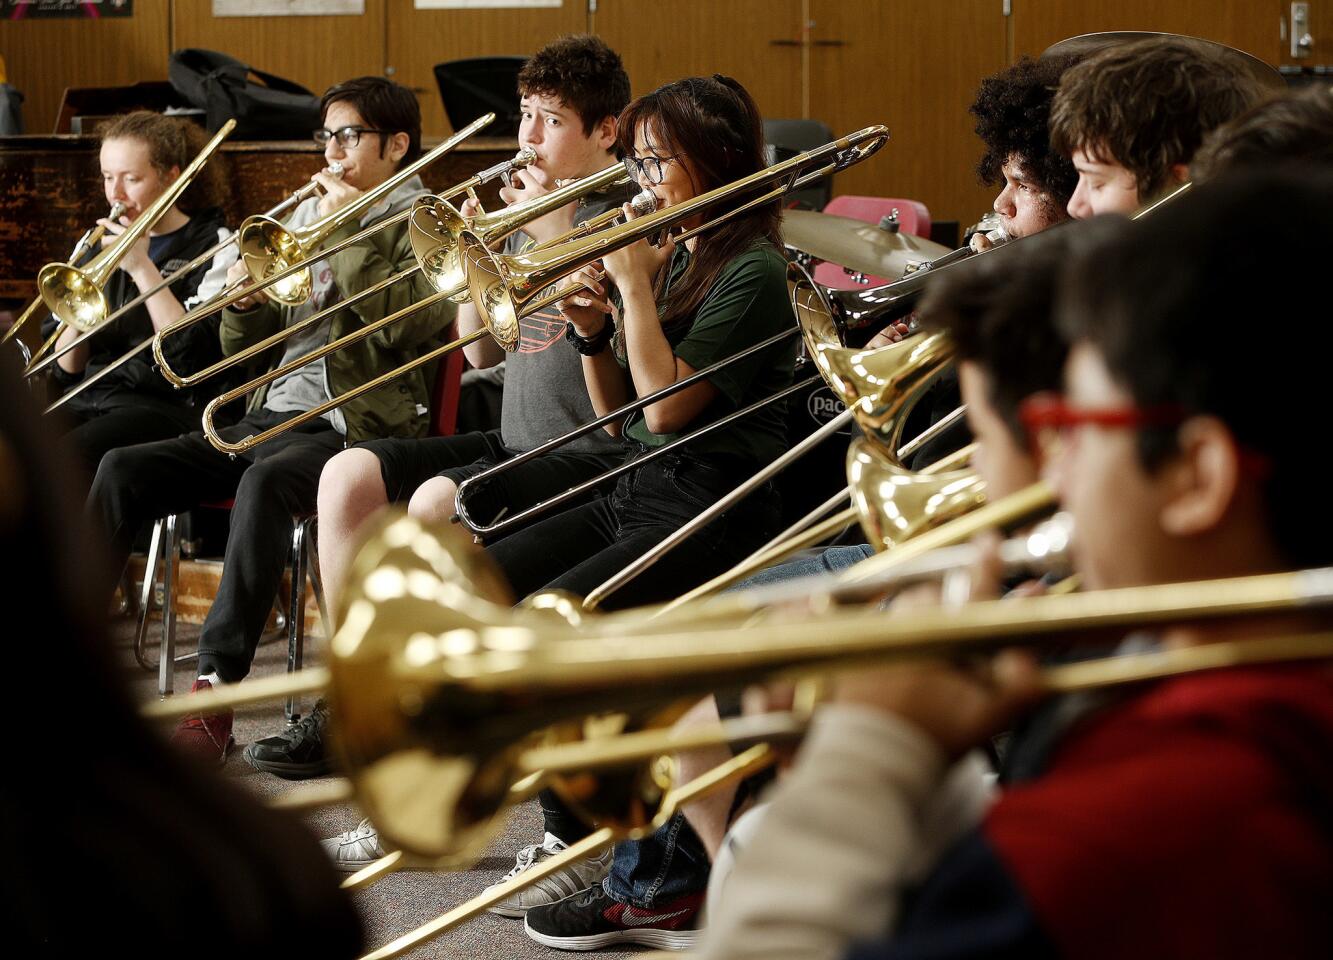 Photo Gallery: Jazz trombonist Nick Finzer visits Glendale High School for a regional trombone lesson and discussion